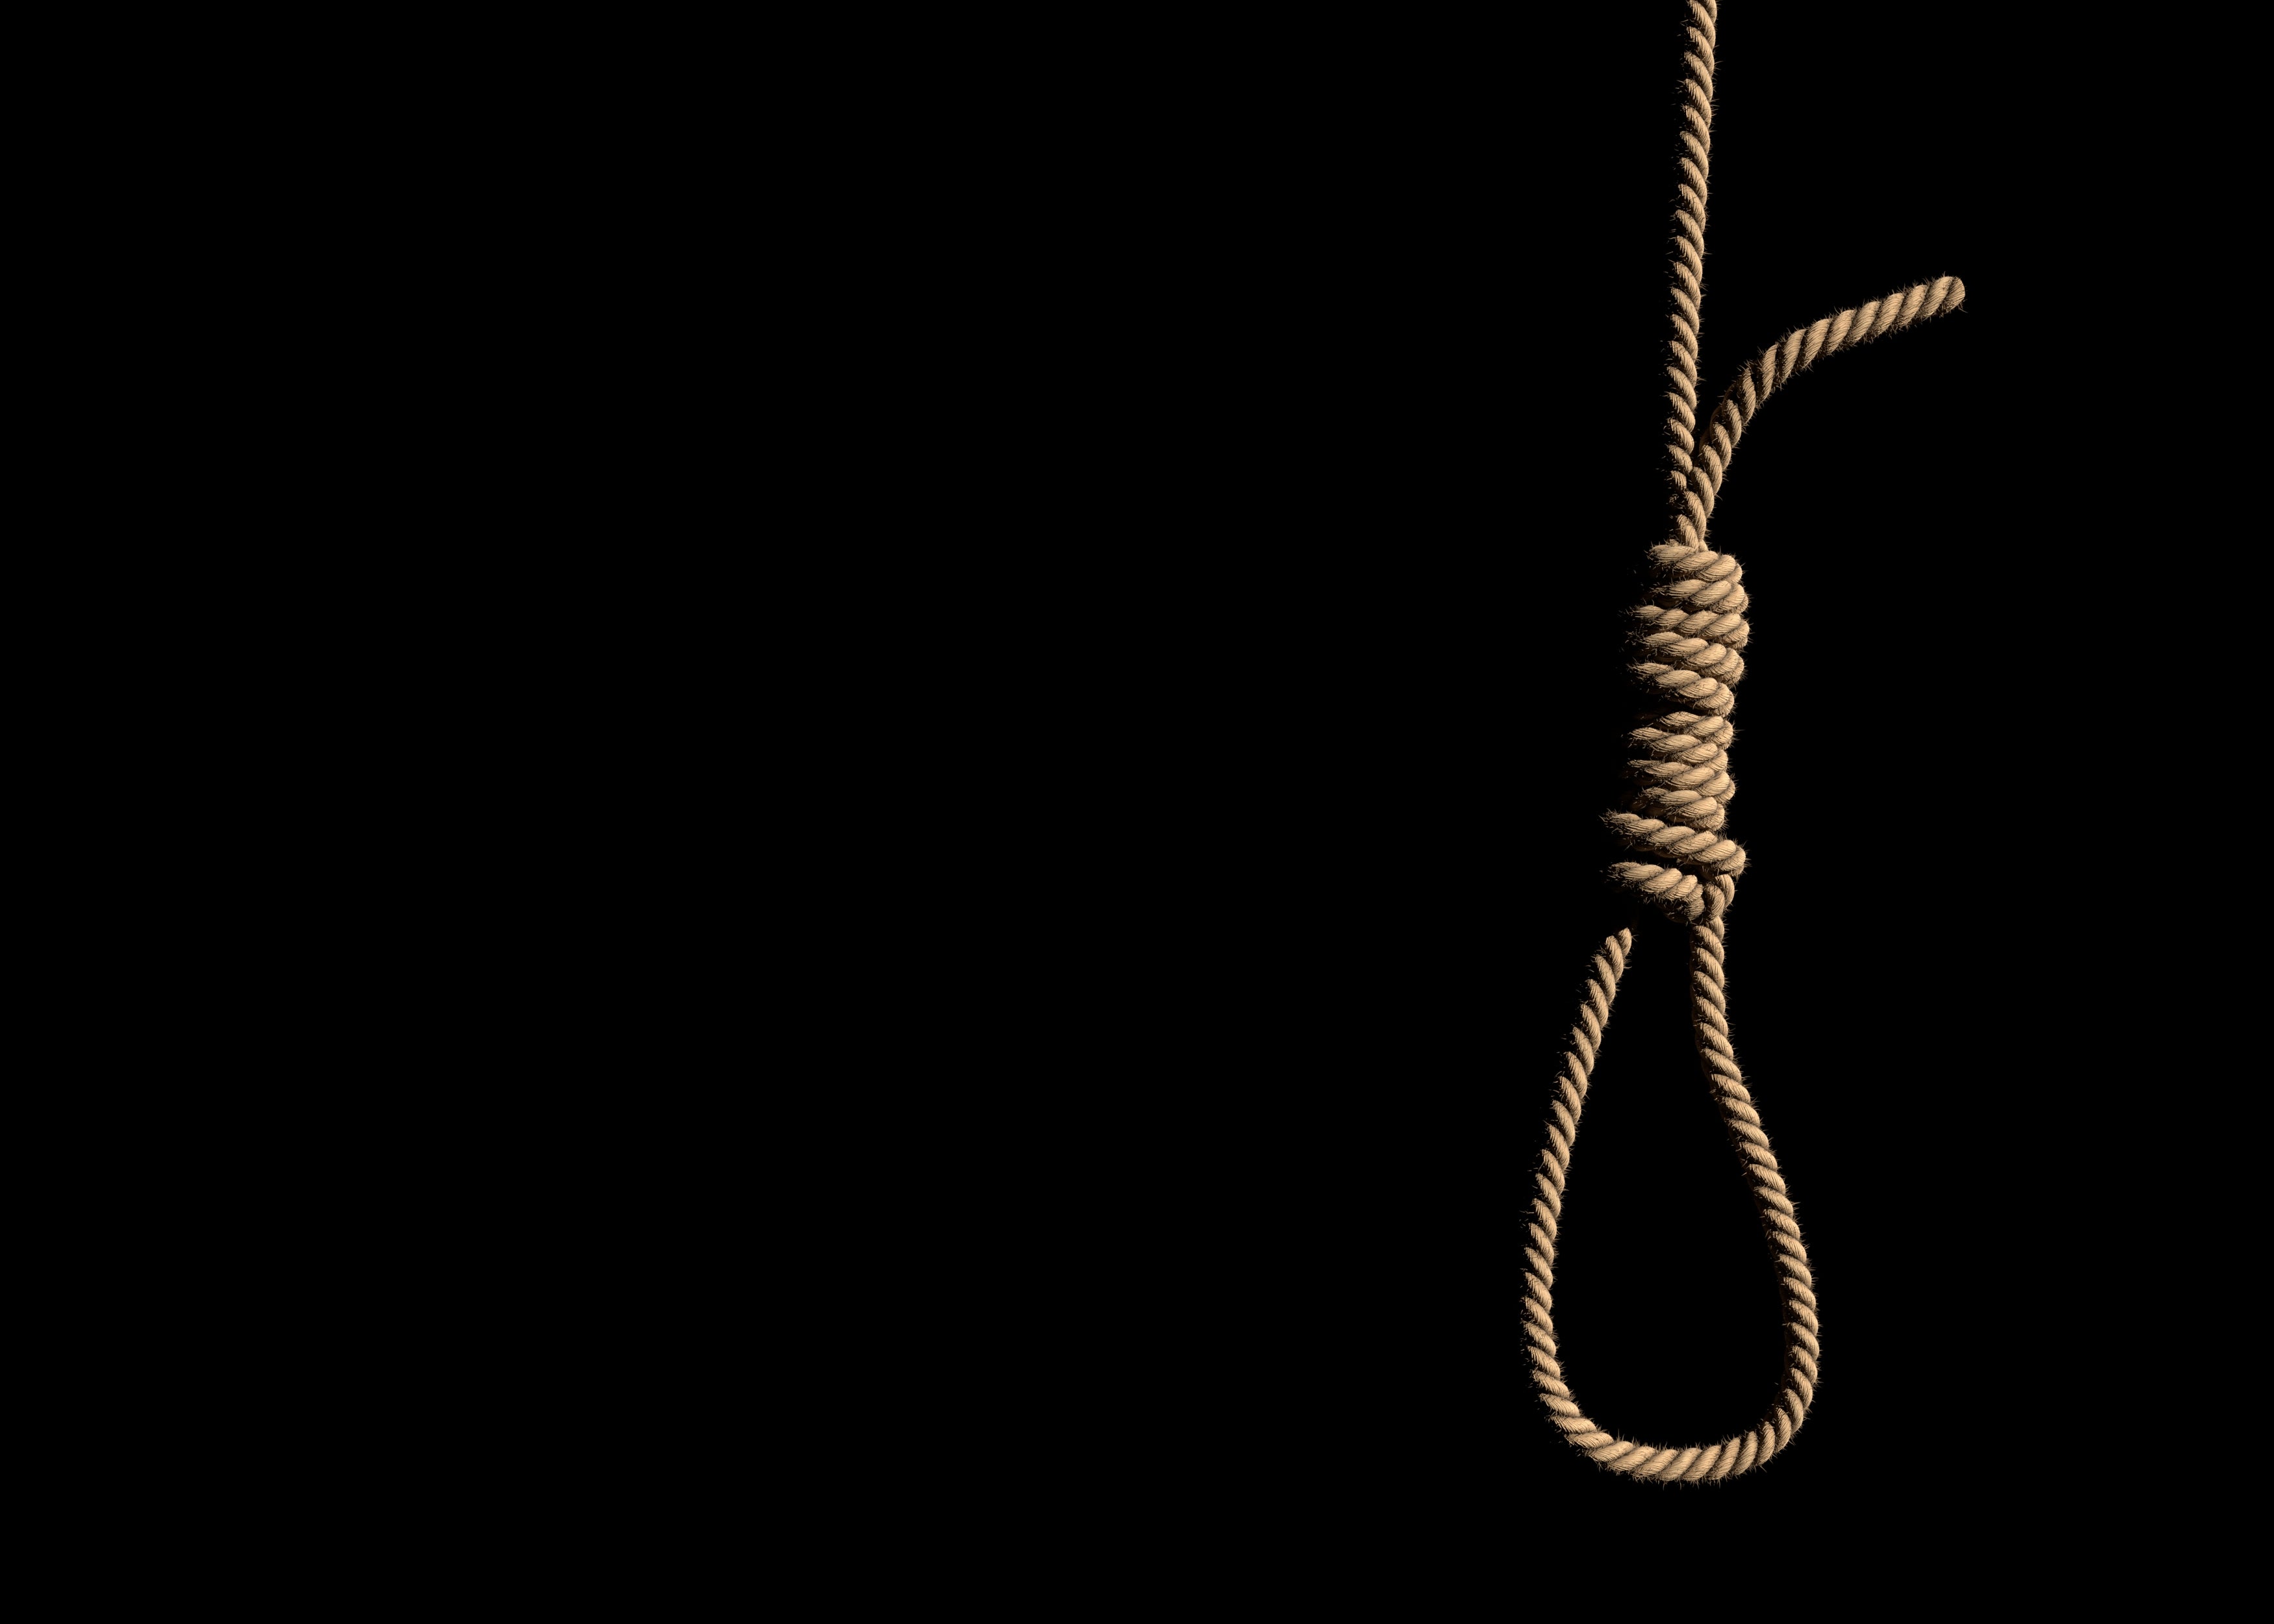 University of Illinois Student Charged With Hate Crime After Noose Was Found In Dorm Elevator